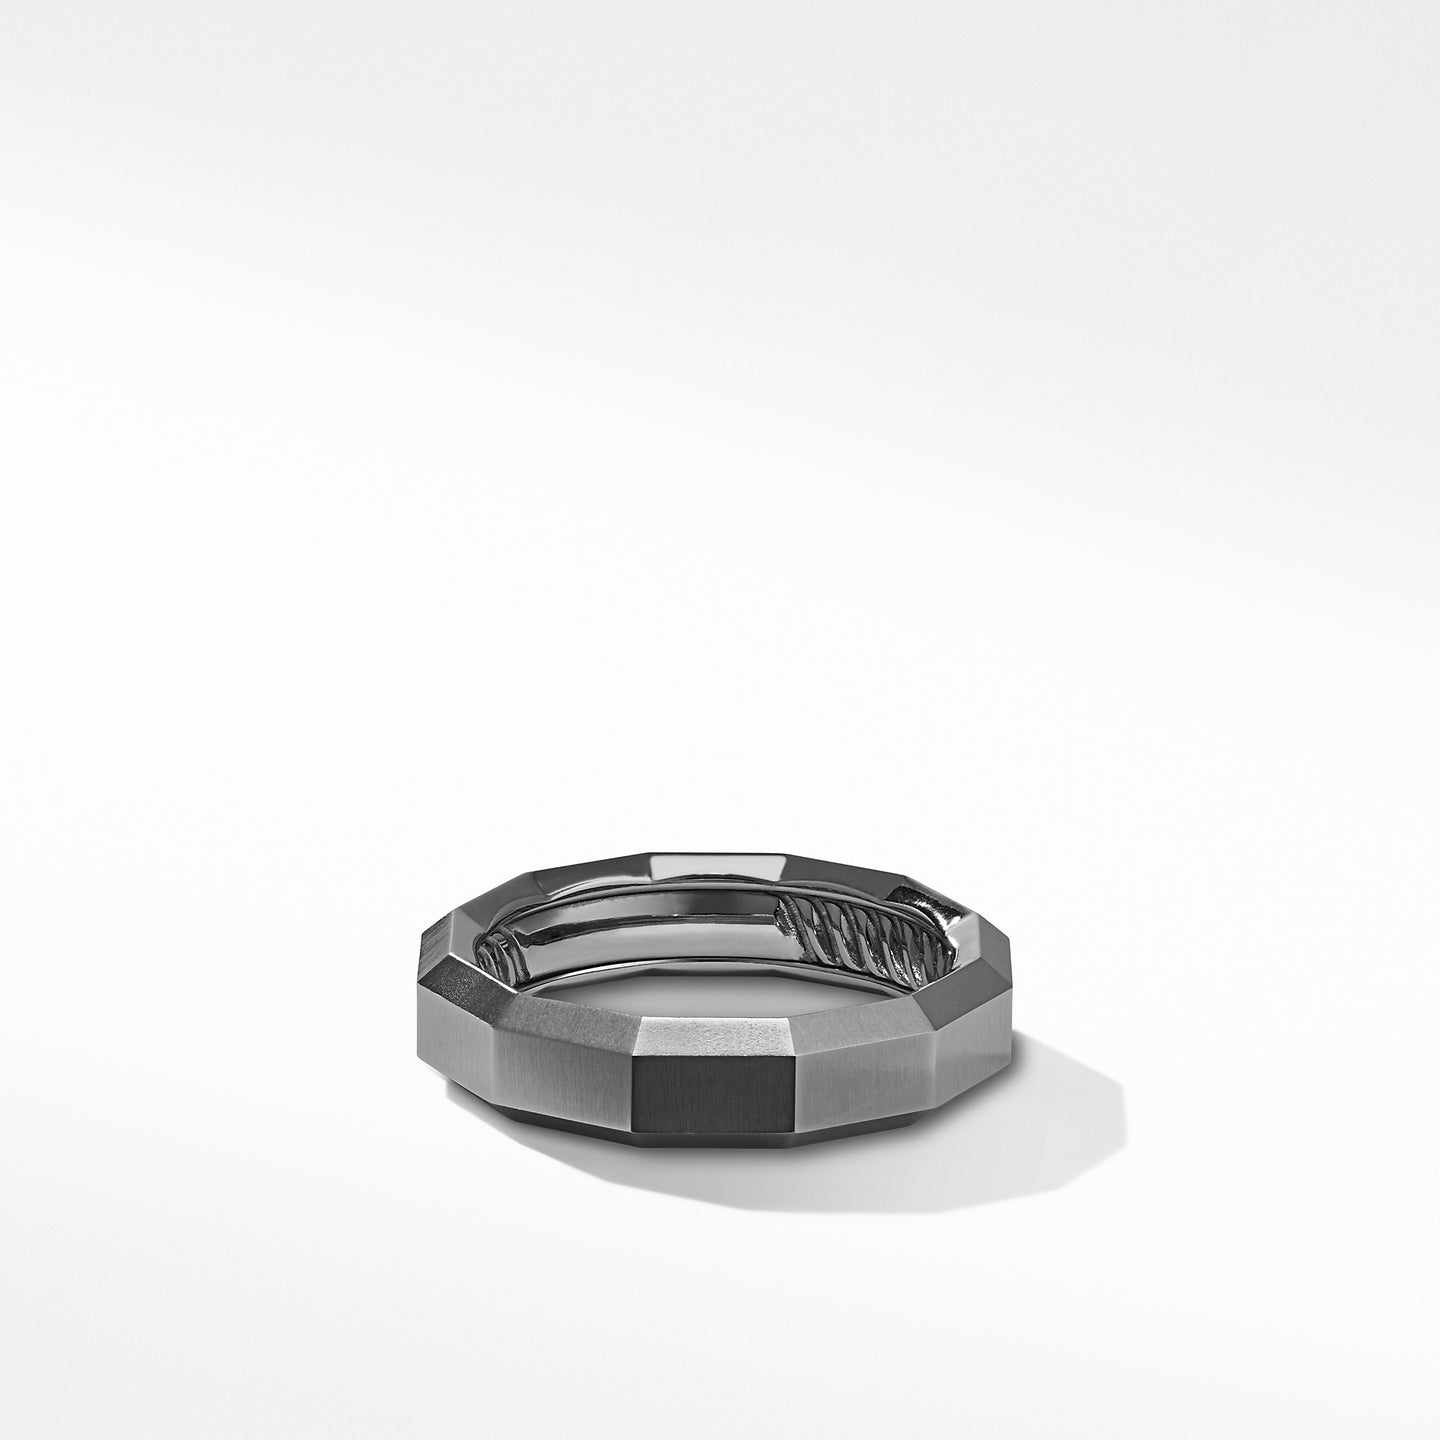 Faceted Band Ring in Grey Titanium, Size 10